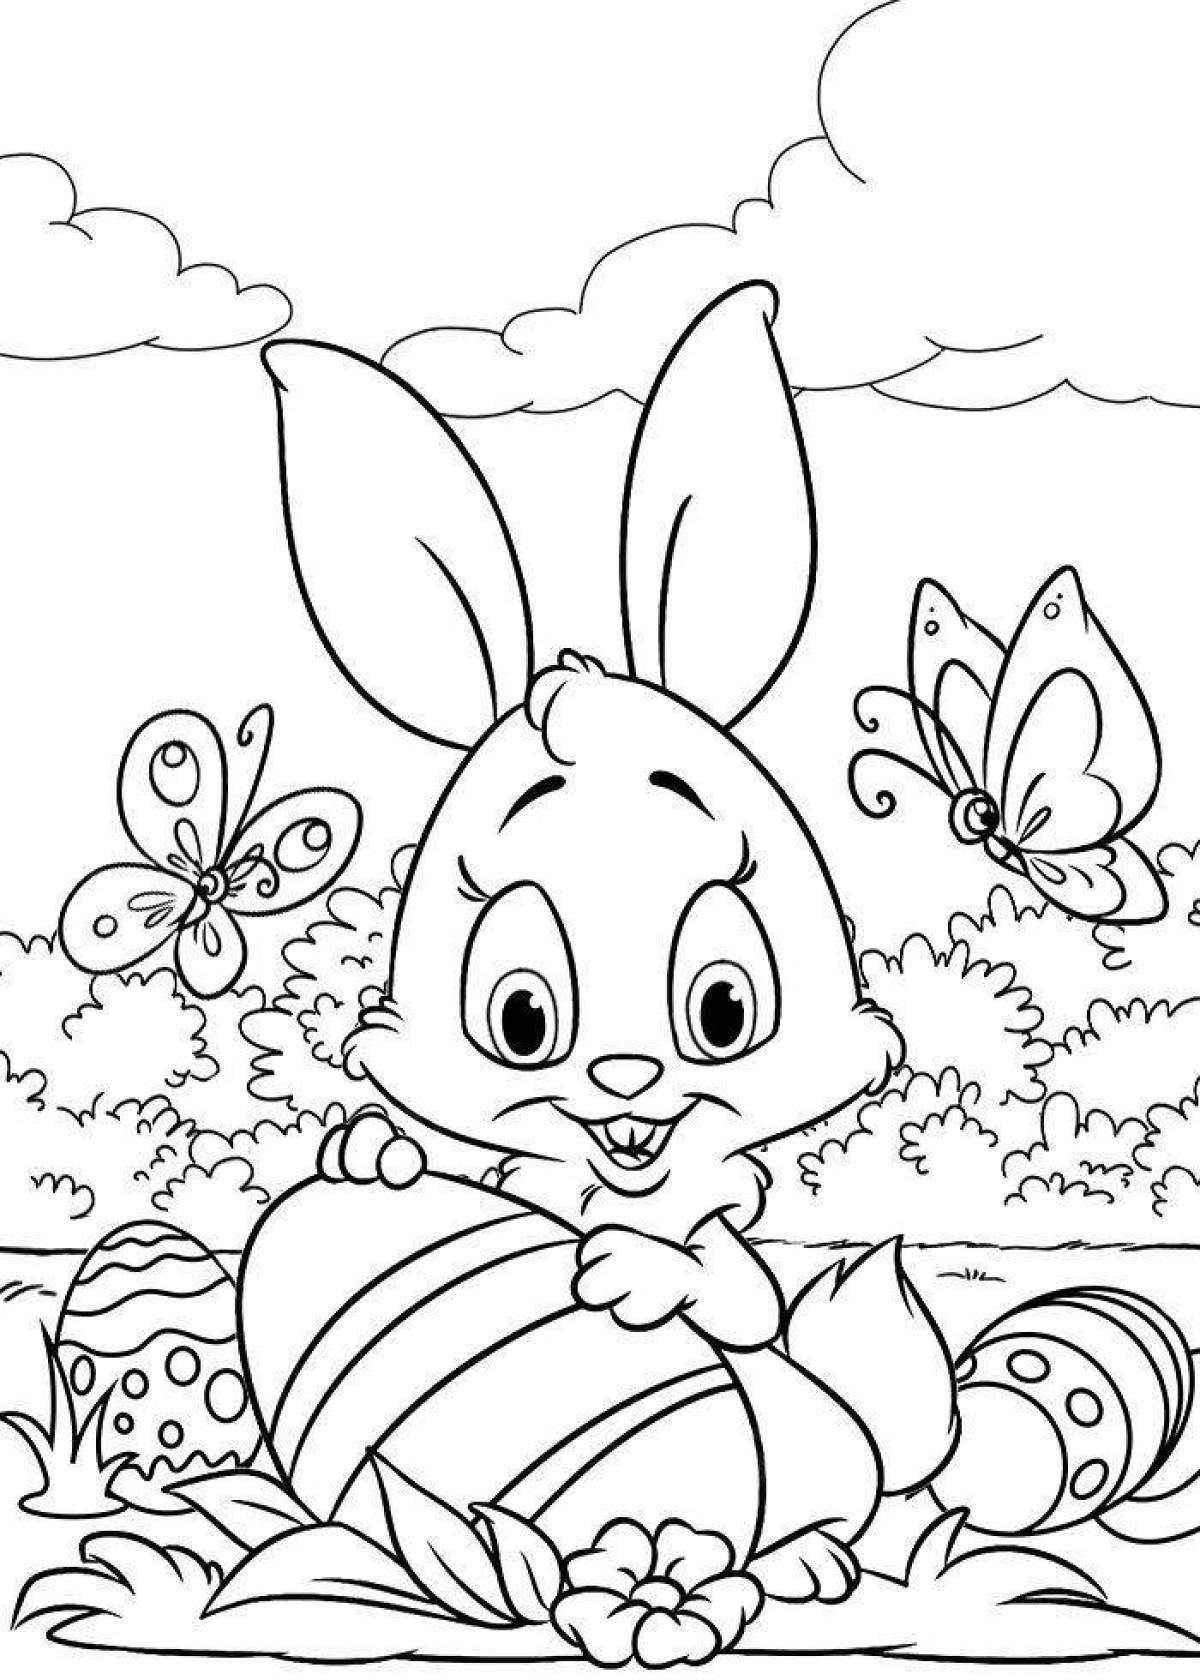 Easter bunny live coloring